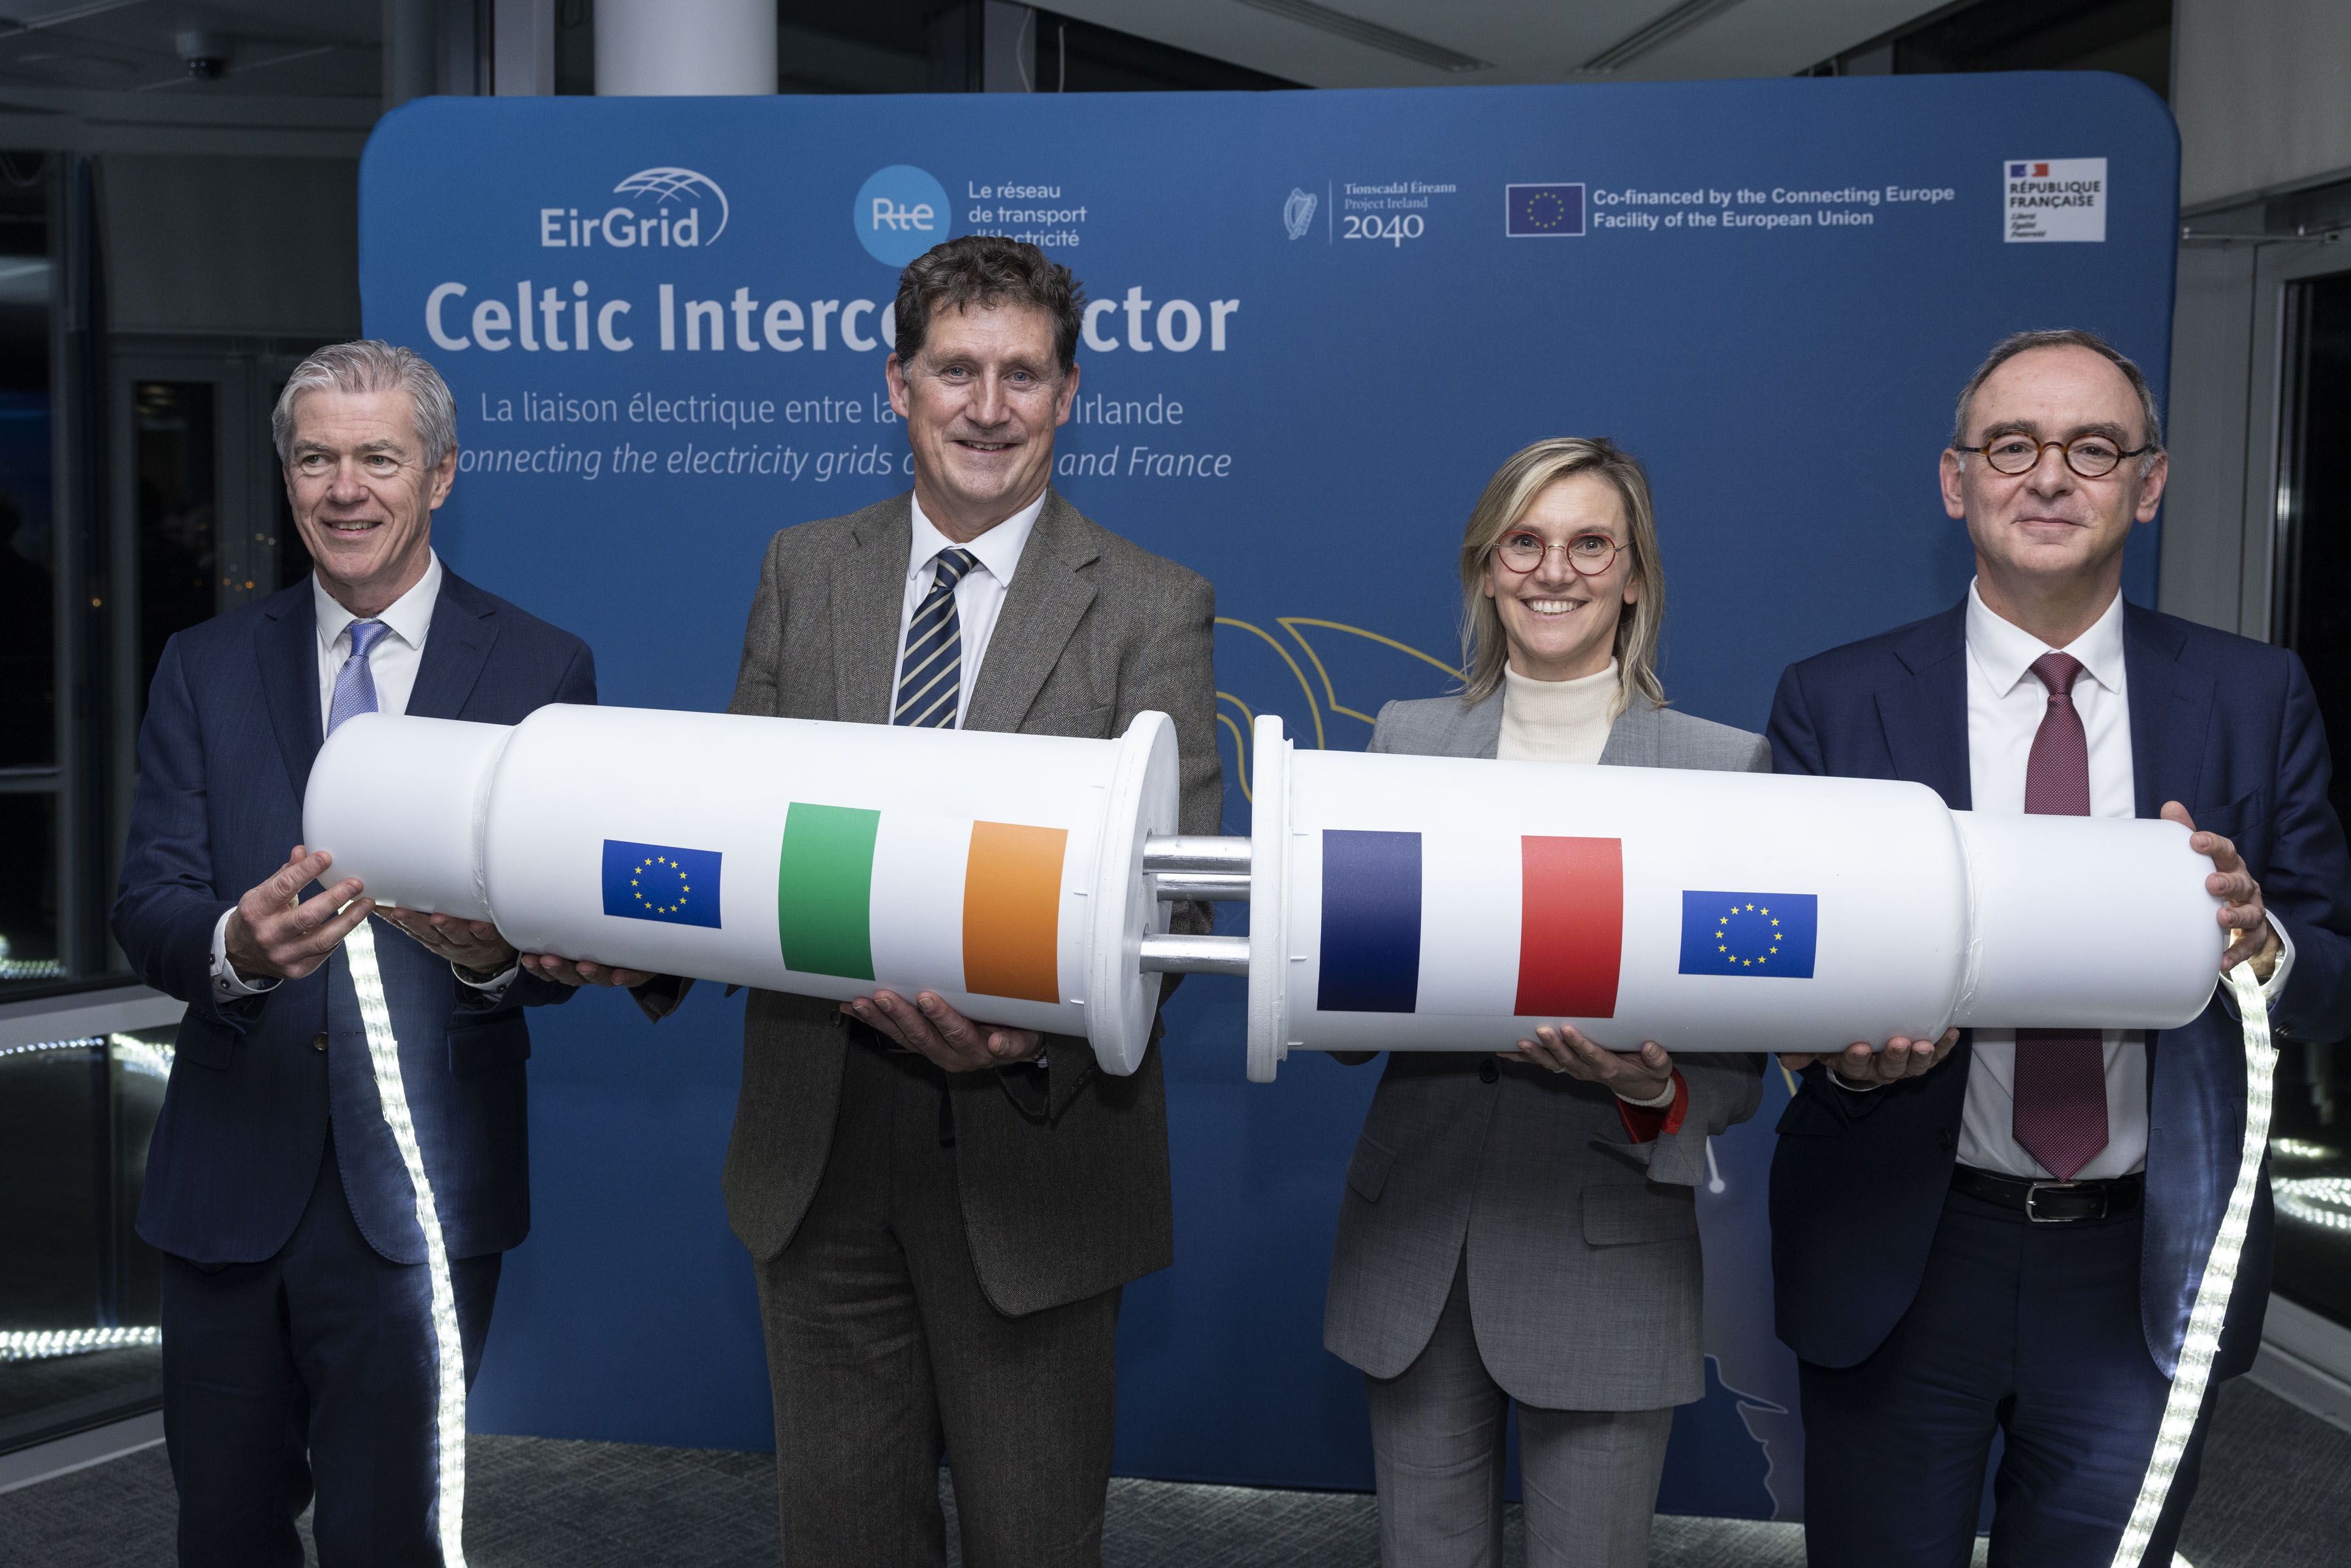 Senior executives and ministers hold a prop symbolising interconnection between Ireland and France